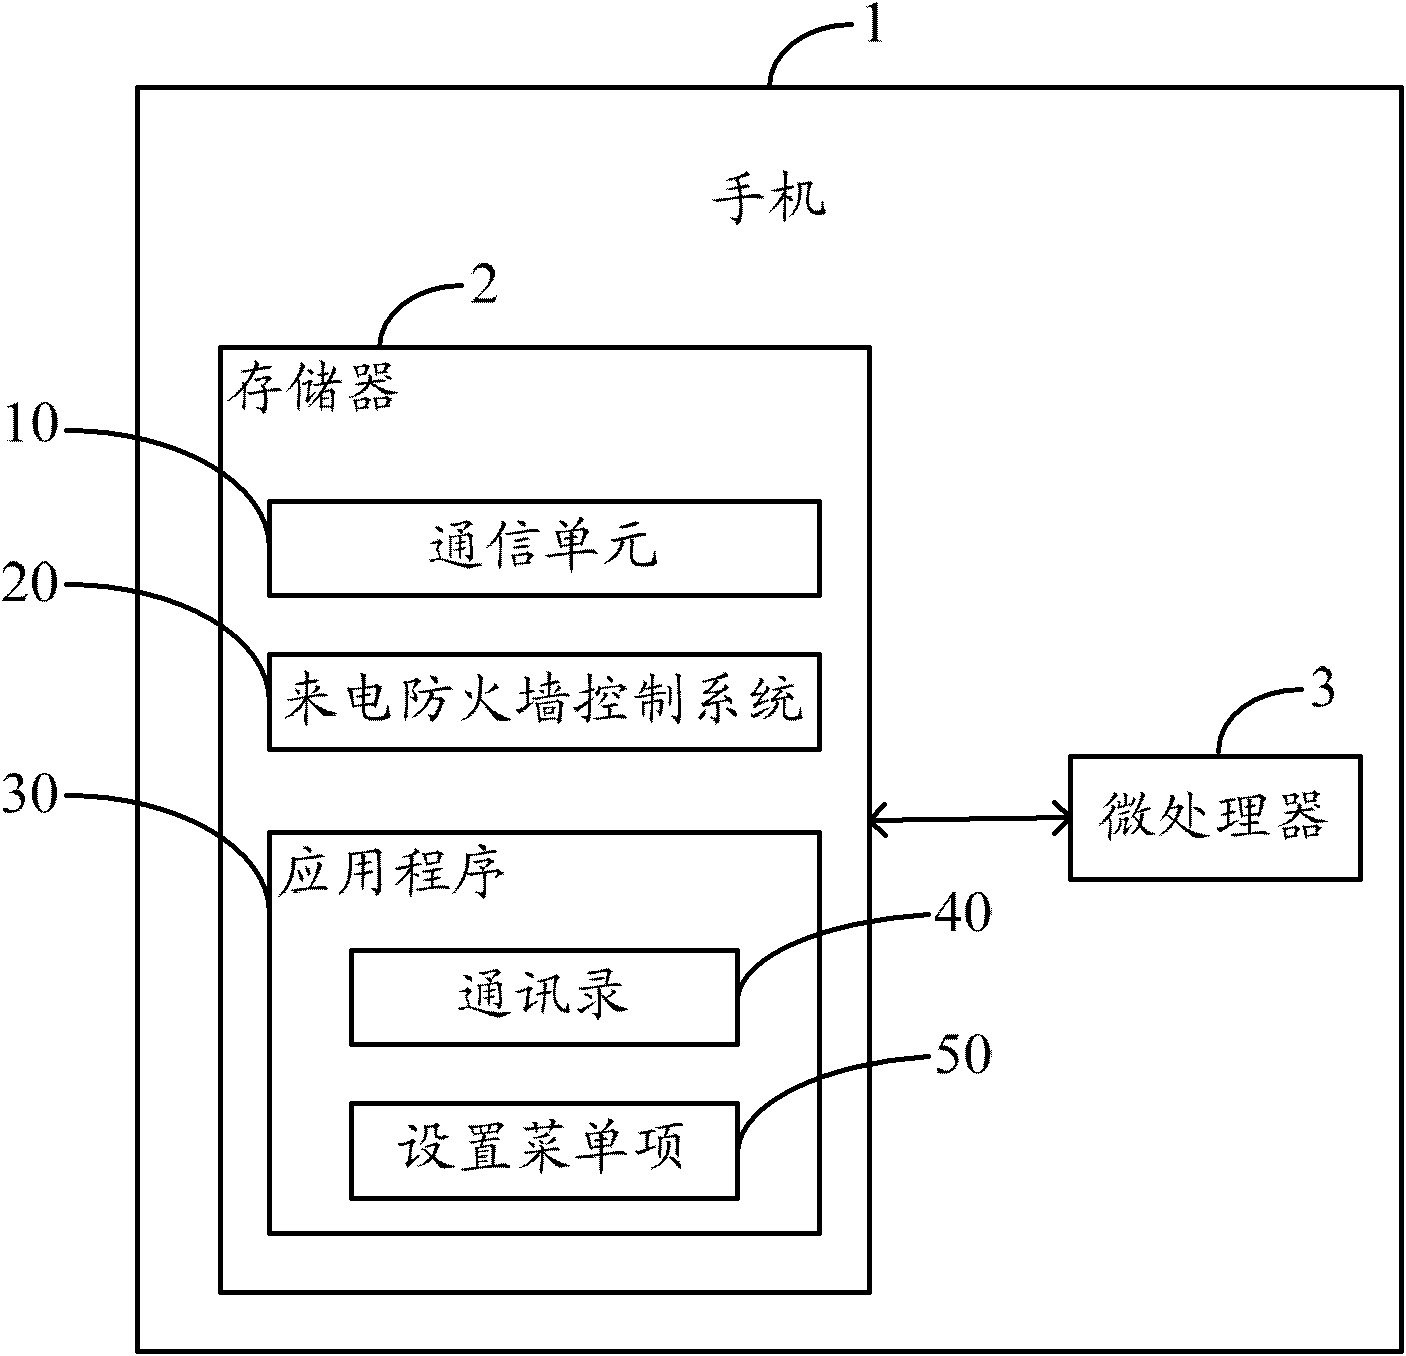 Mobile phone call firewall control system and method